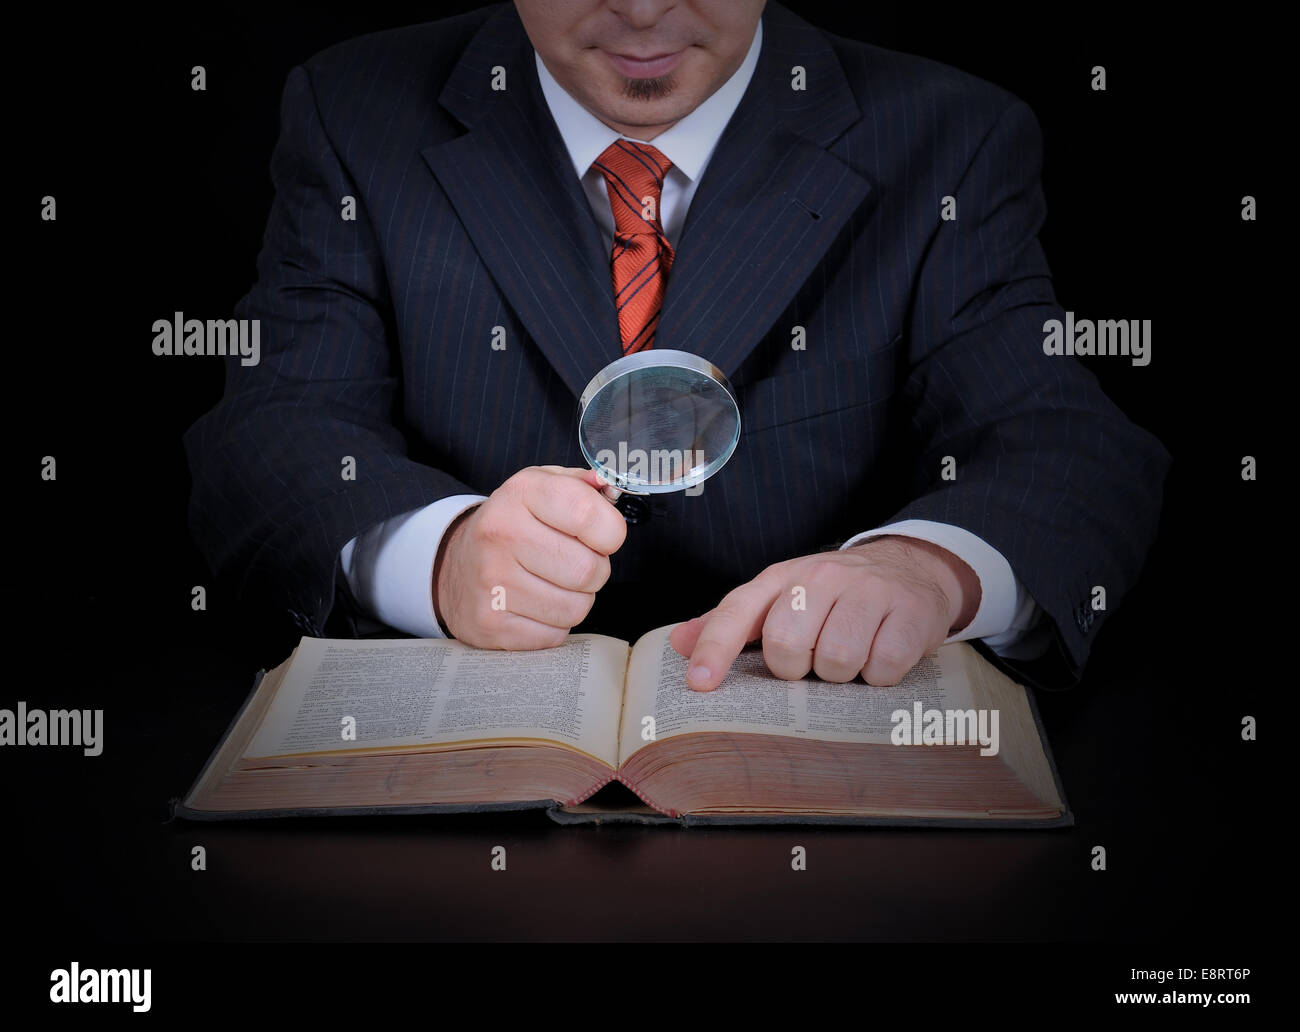 Mans Hand Examining An Old Stamp Book With Magnifying Glass Stock